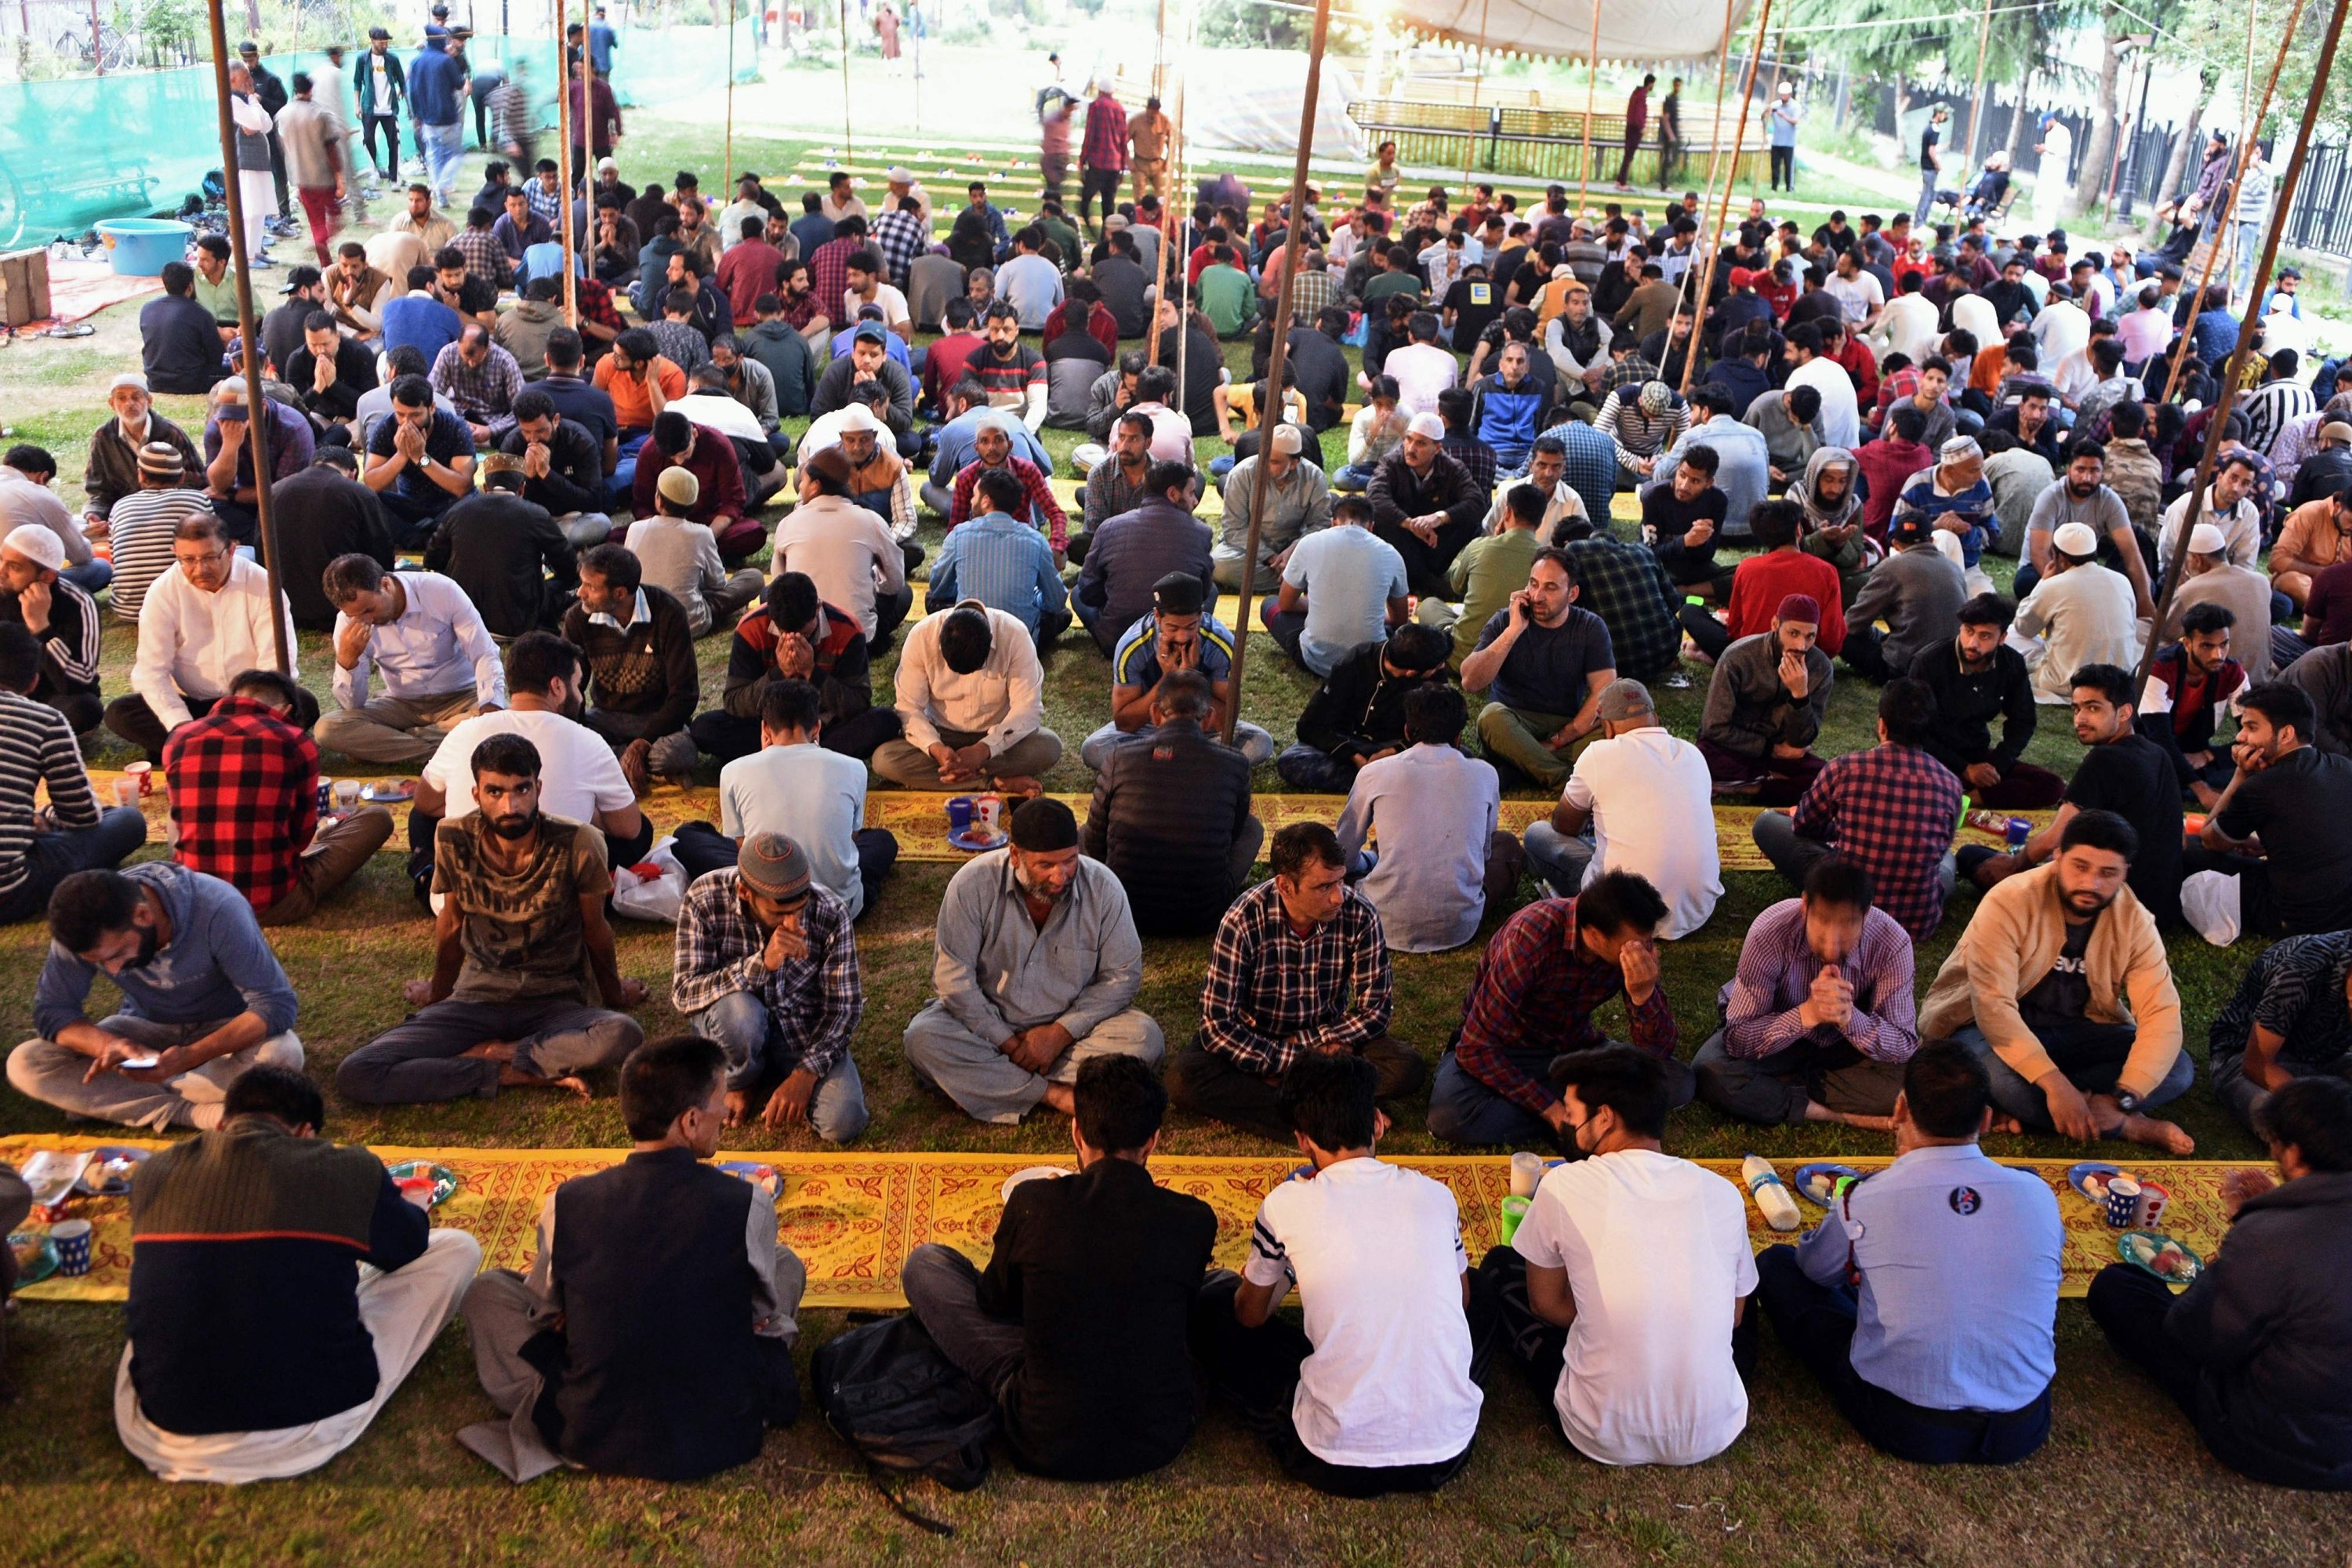 Muslim devotees prepare to break their fast at a mosque during the holy fasting month of Ramadan in Srinagar, Kashmir, Apr. 18, 2022. (AFP)